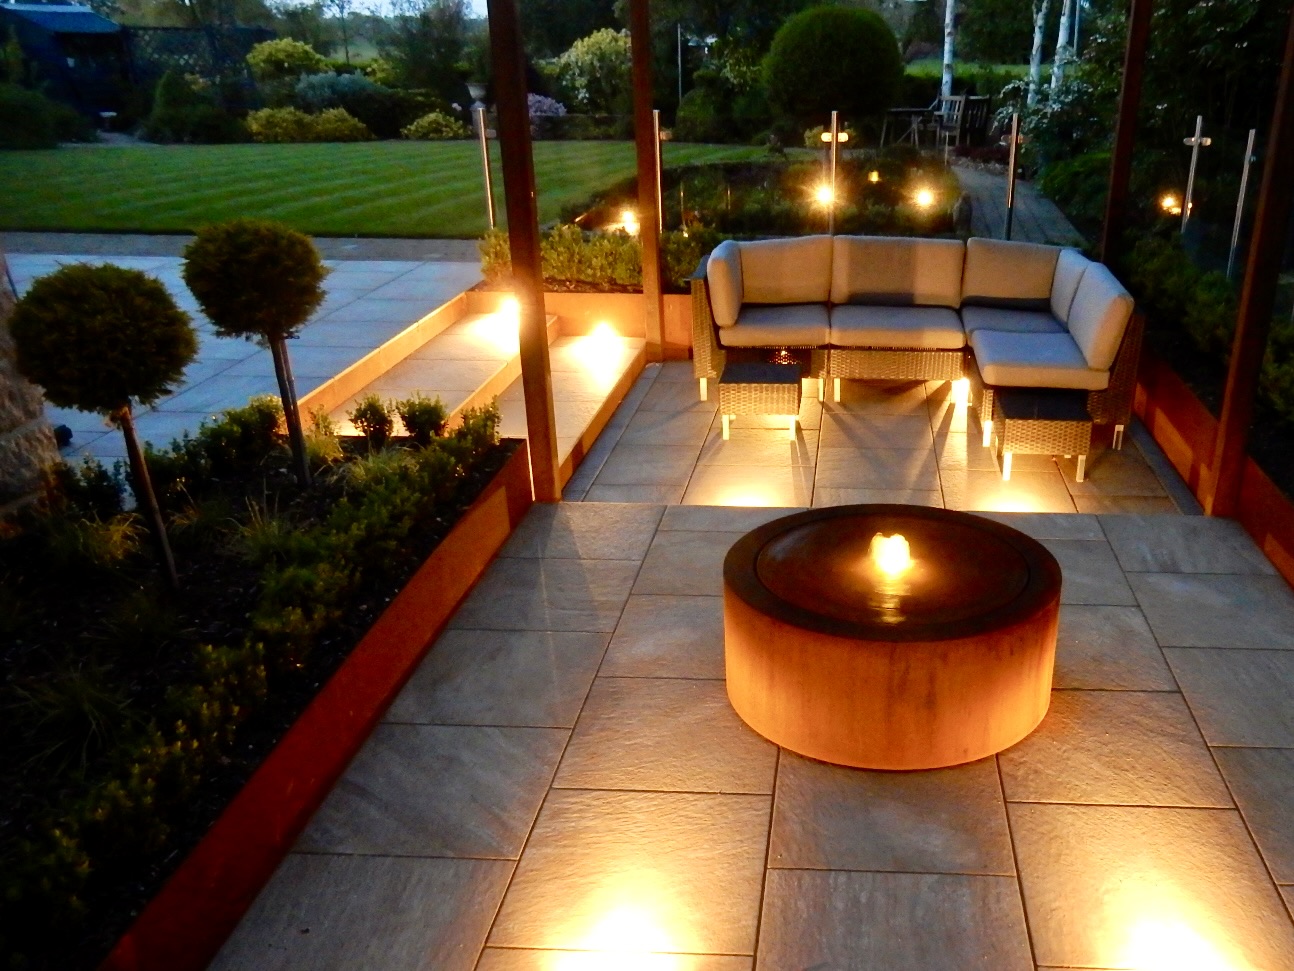 A contemporary garden with water and lighting